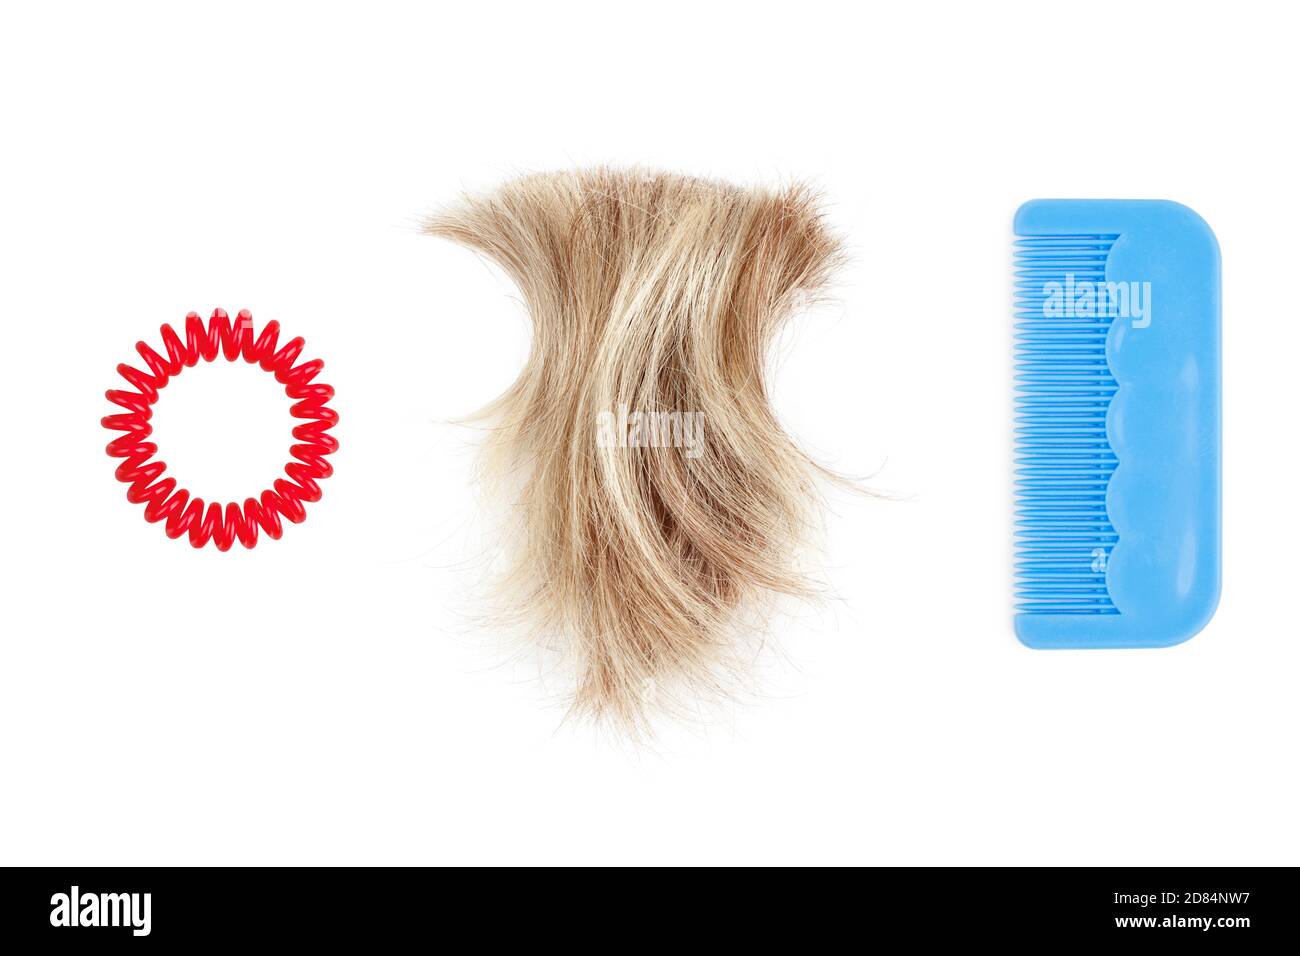 Blond lock of hair, red scrunchie, blue plastic comb white background isolated close up, cut off blonde hair curl, hair brush, spiral hair band Stock Photo